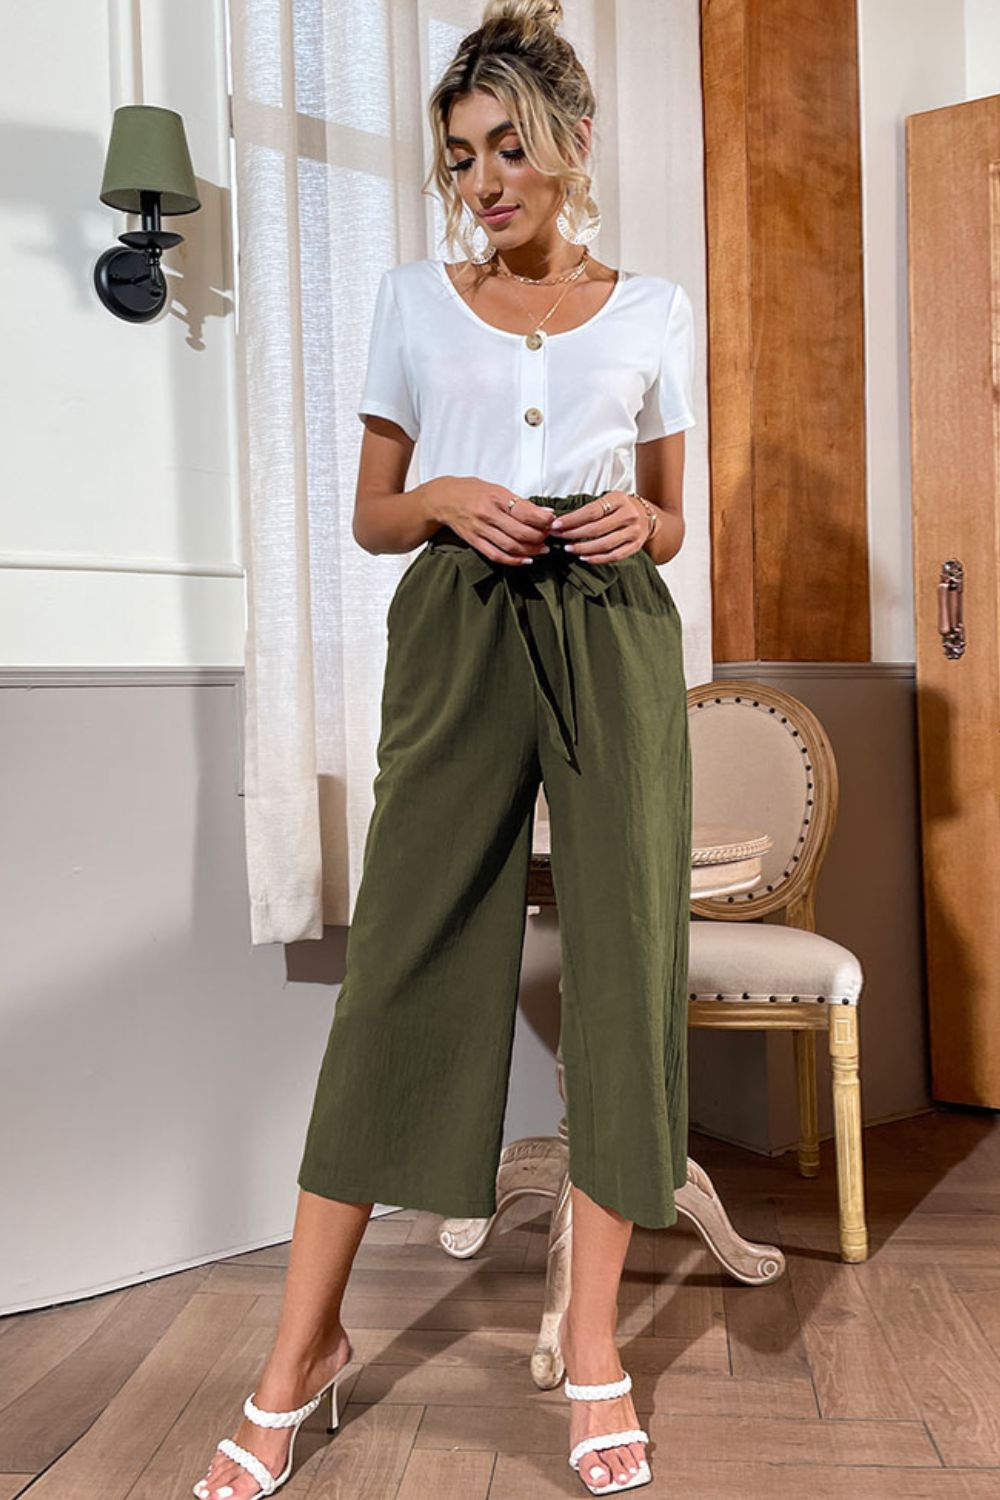 Round Neck Short Sleeve Top and Belted Pants Set - Shah S. Sahota